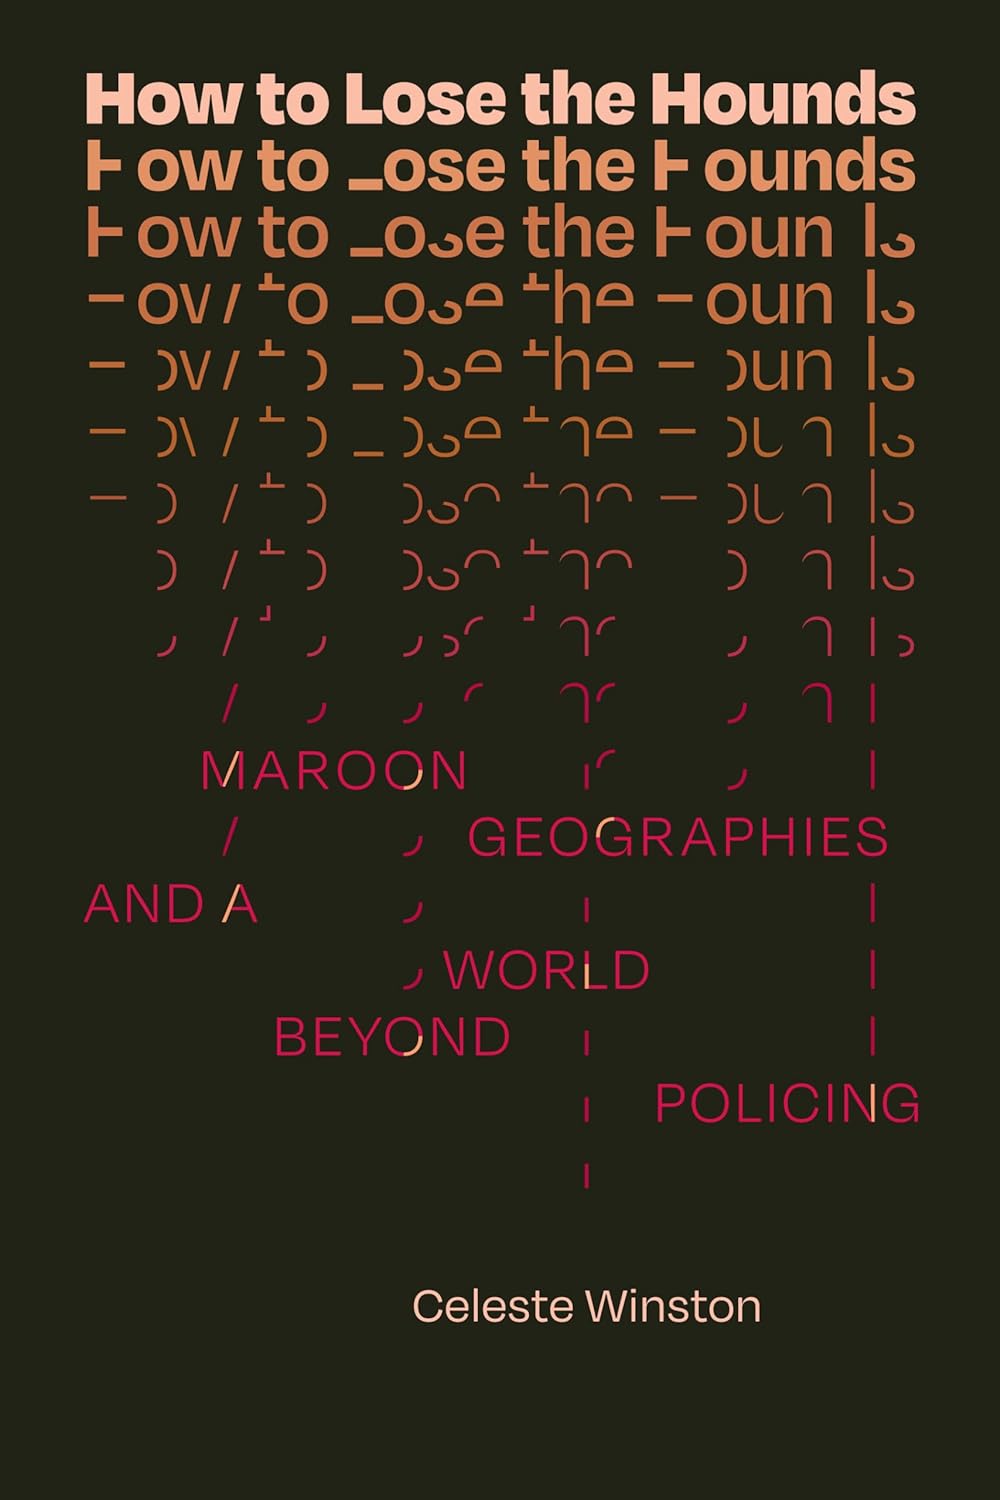 How to Lose the Hounds: Maroon Geographies and a World beyond Policing by Celeste Winston